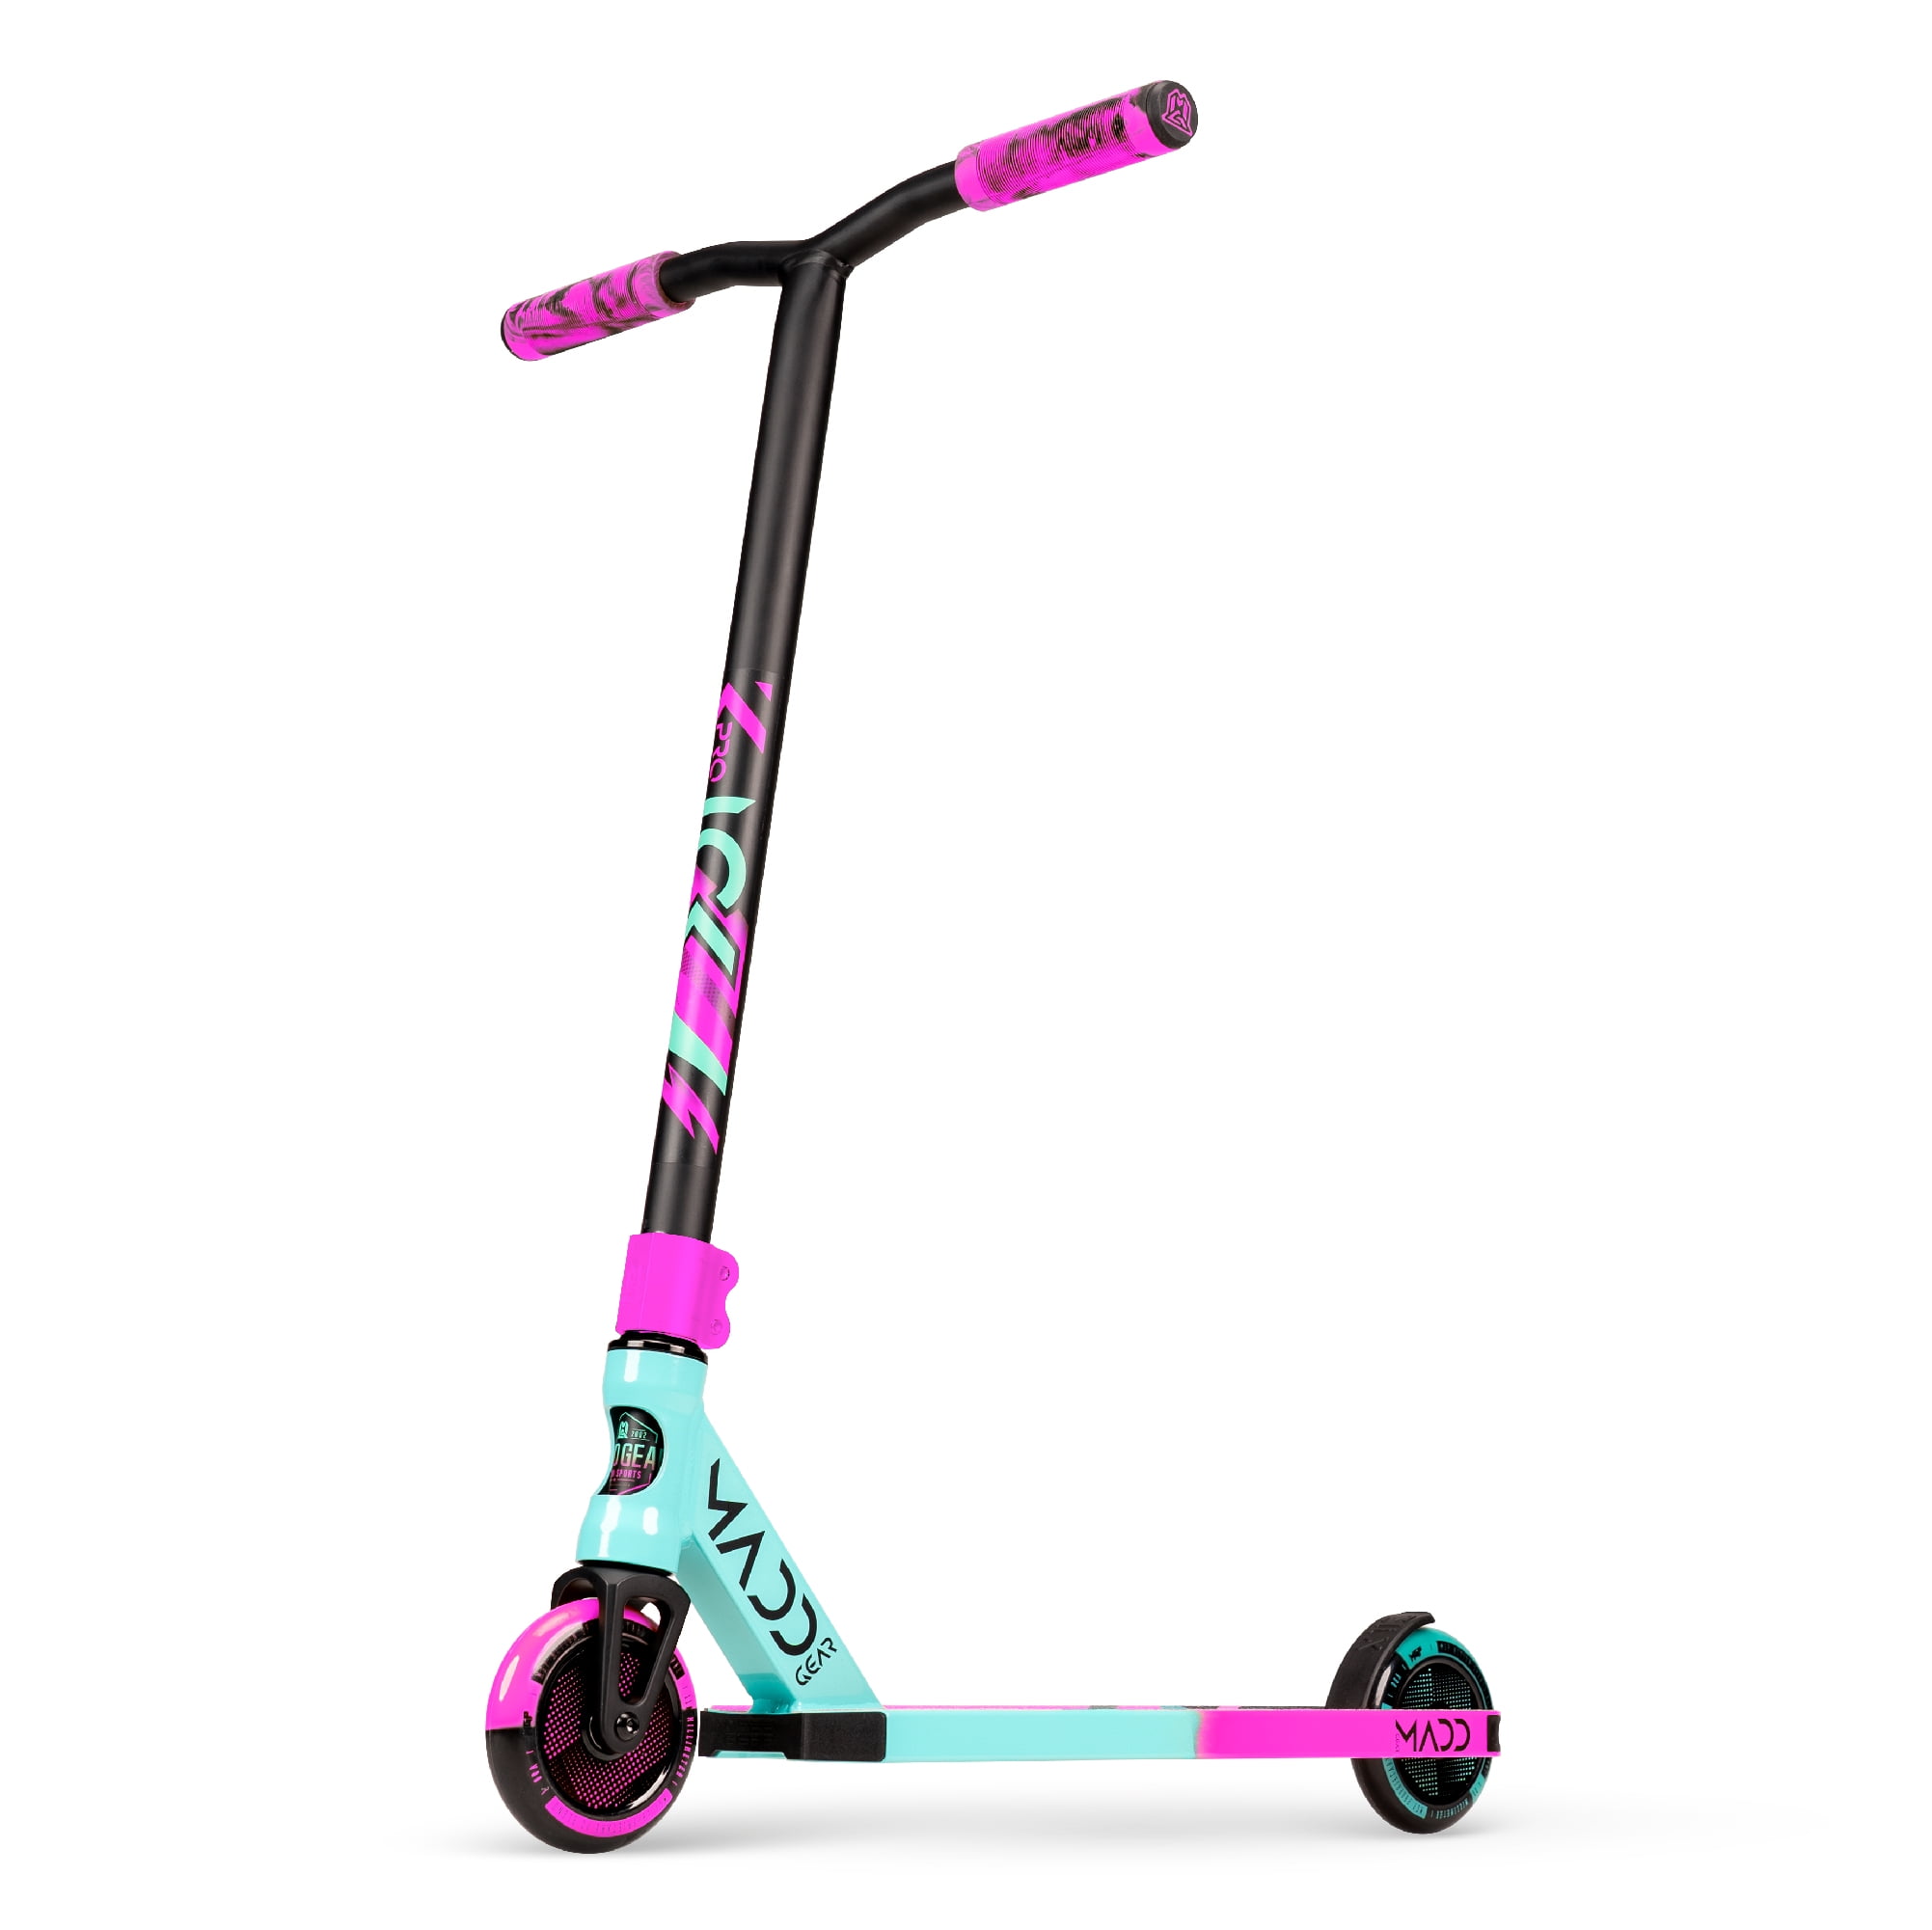 Fuzion X-3 Pro Scooter 2018 Teal for sale online 